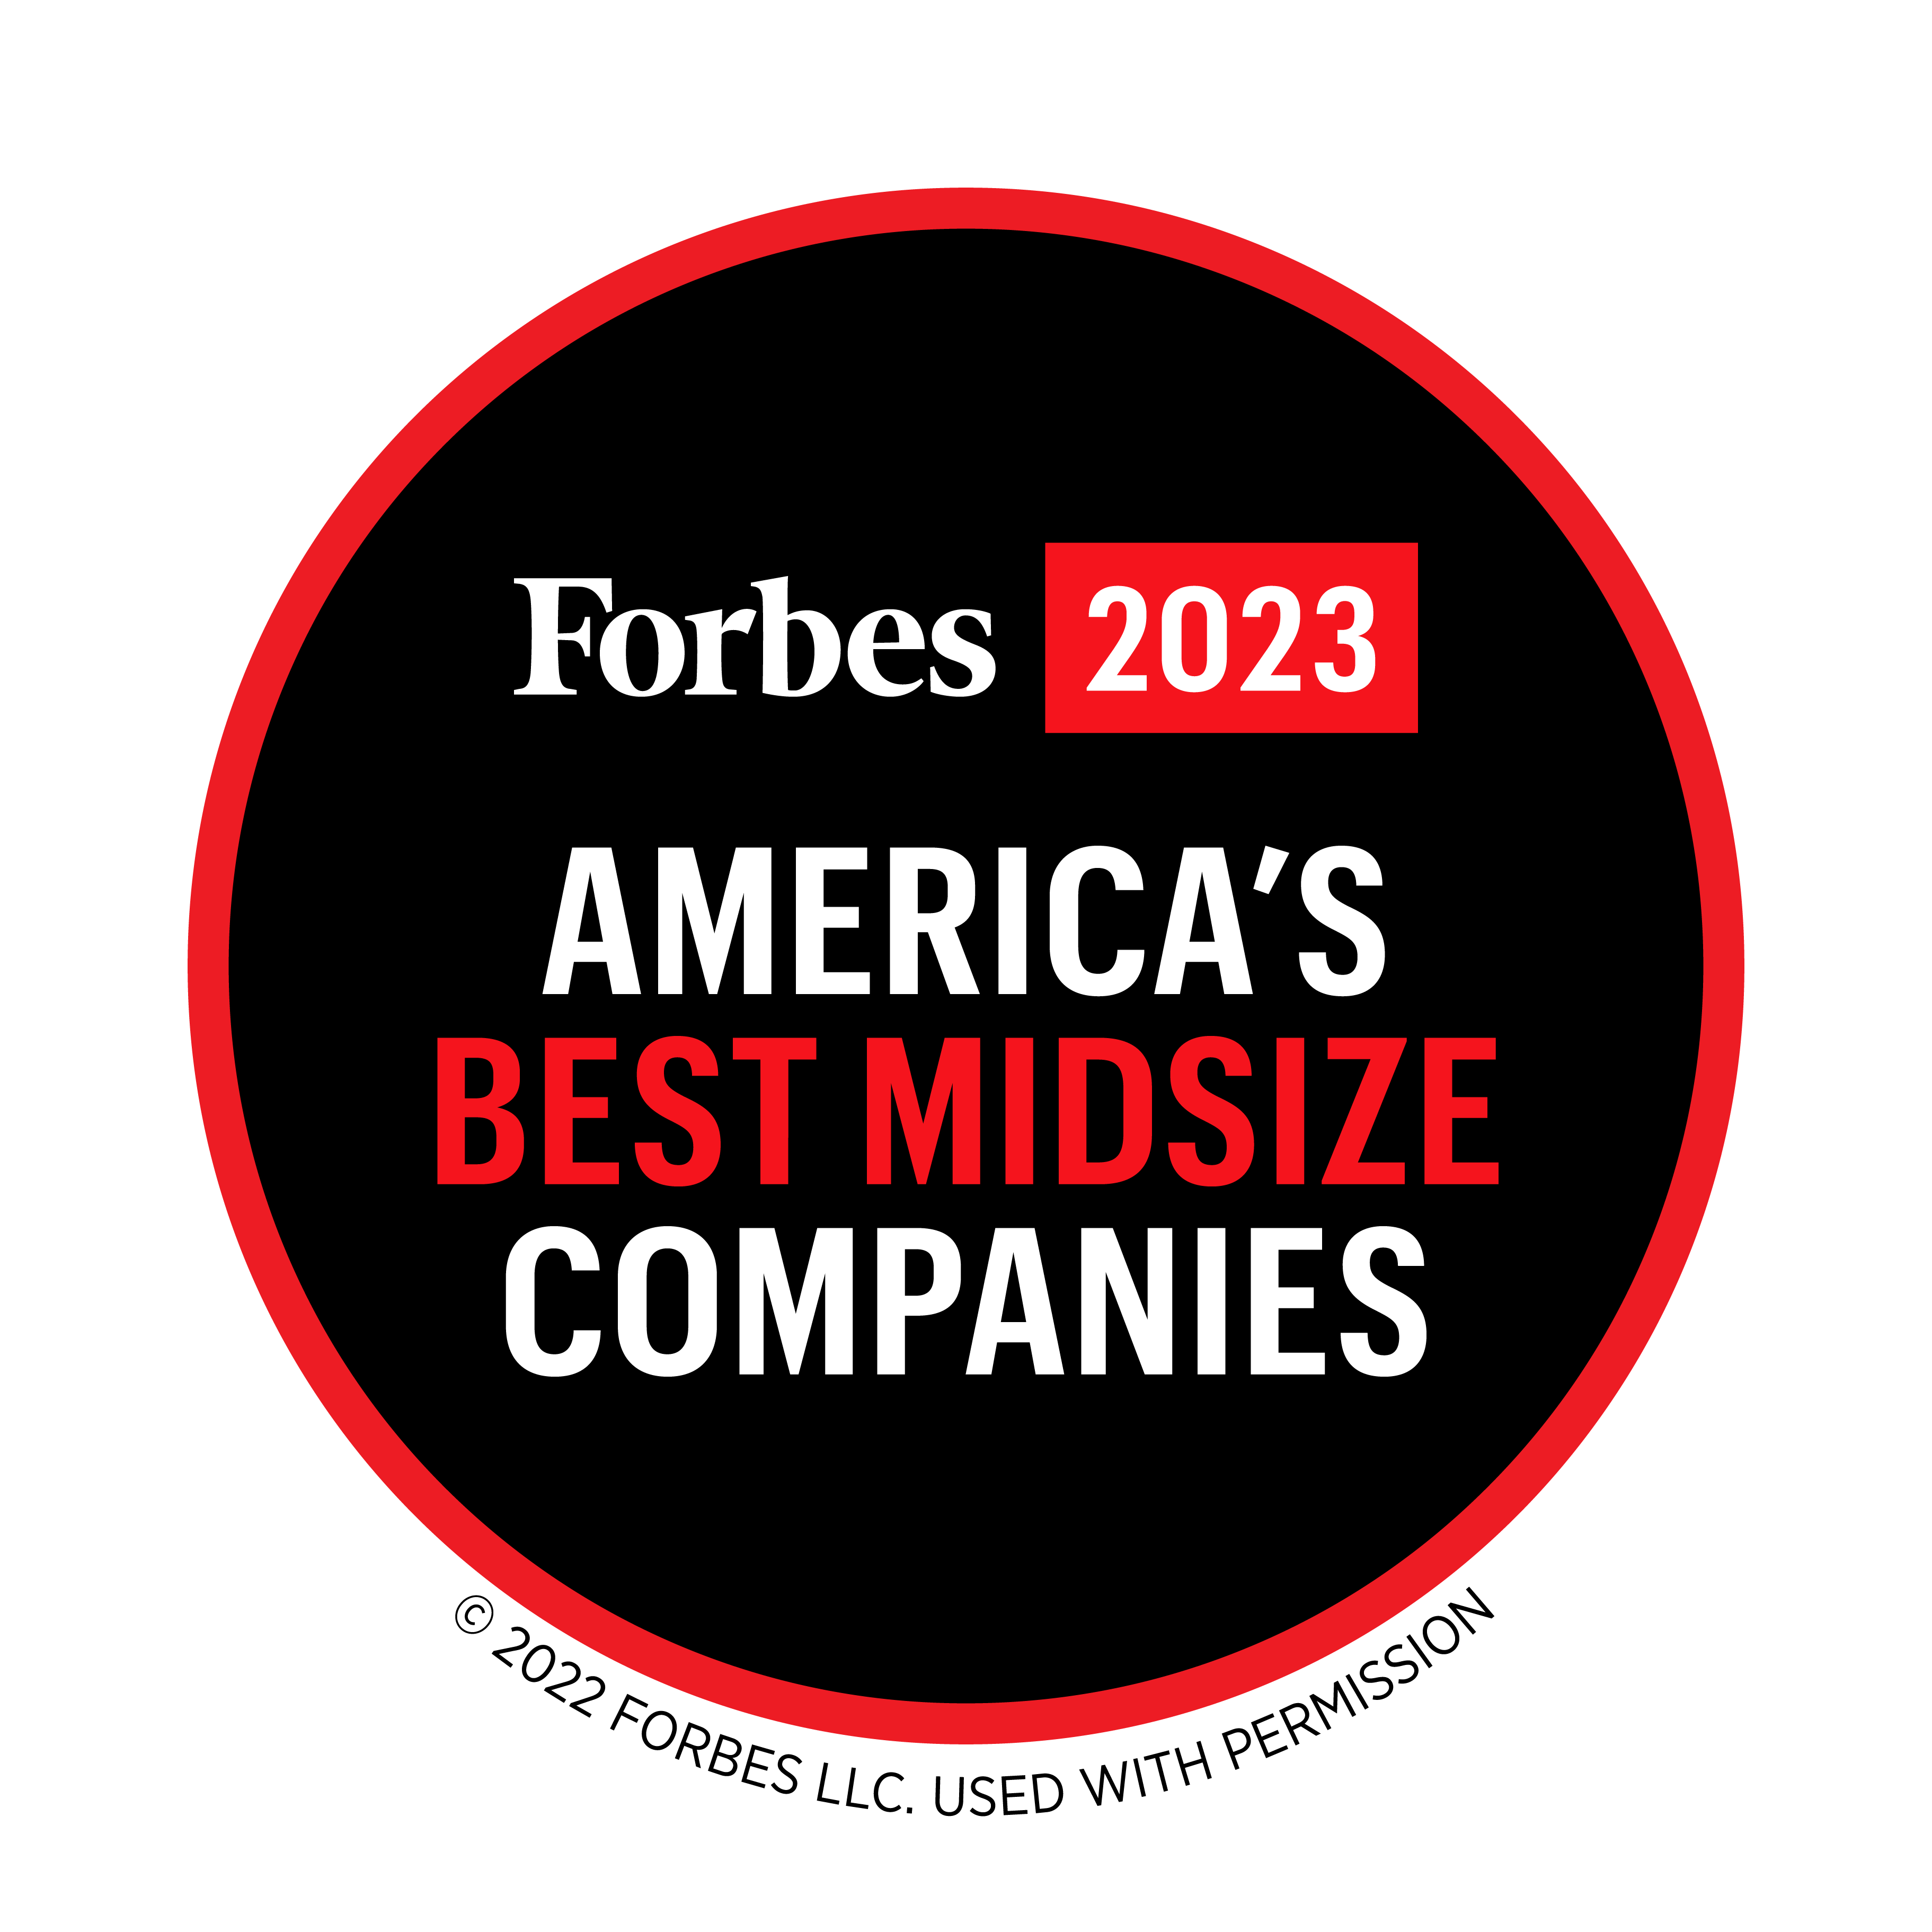 Forbes 2023 America's Best Midsize Companies